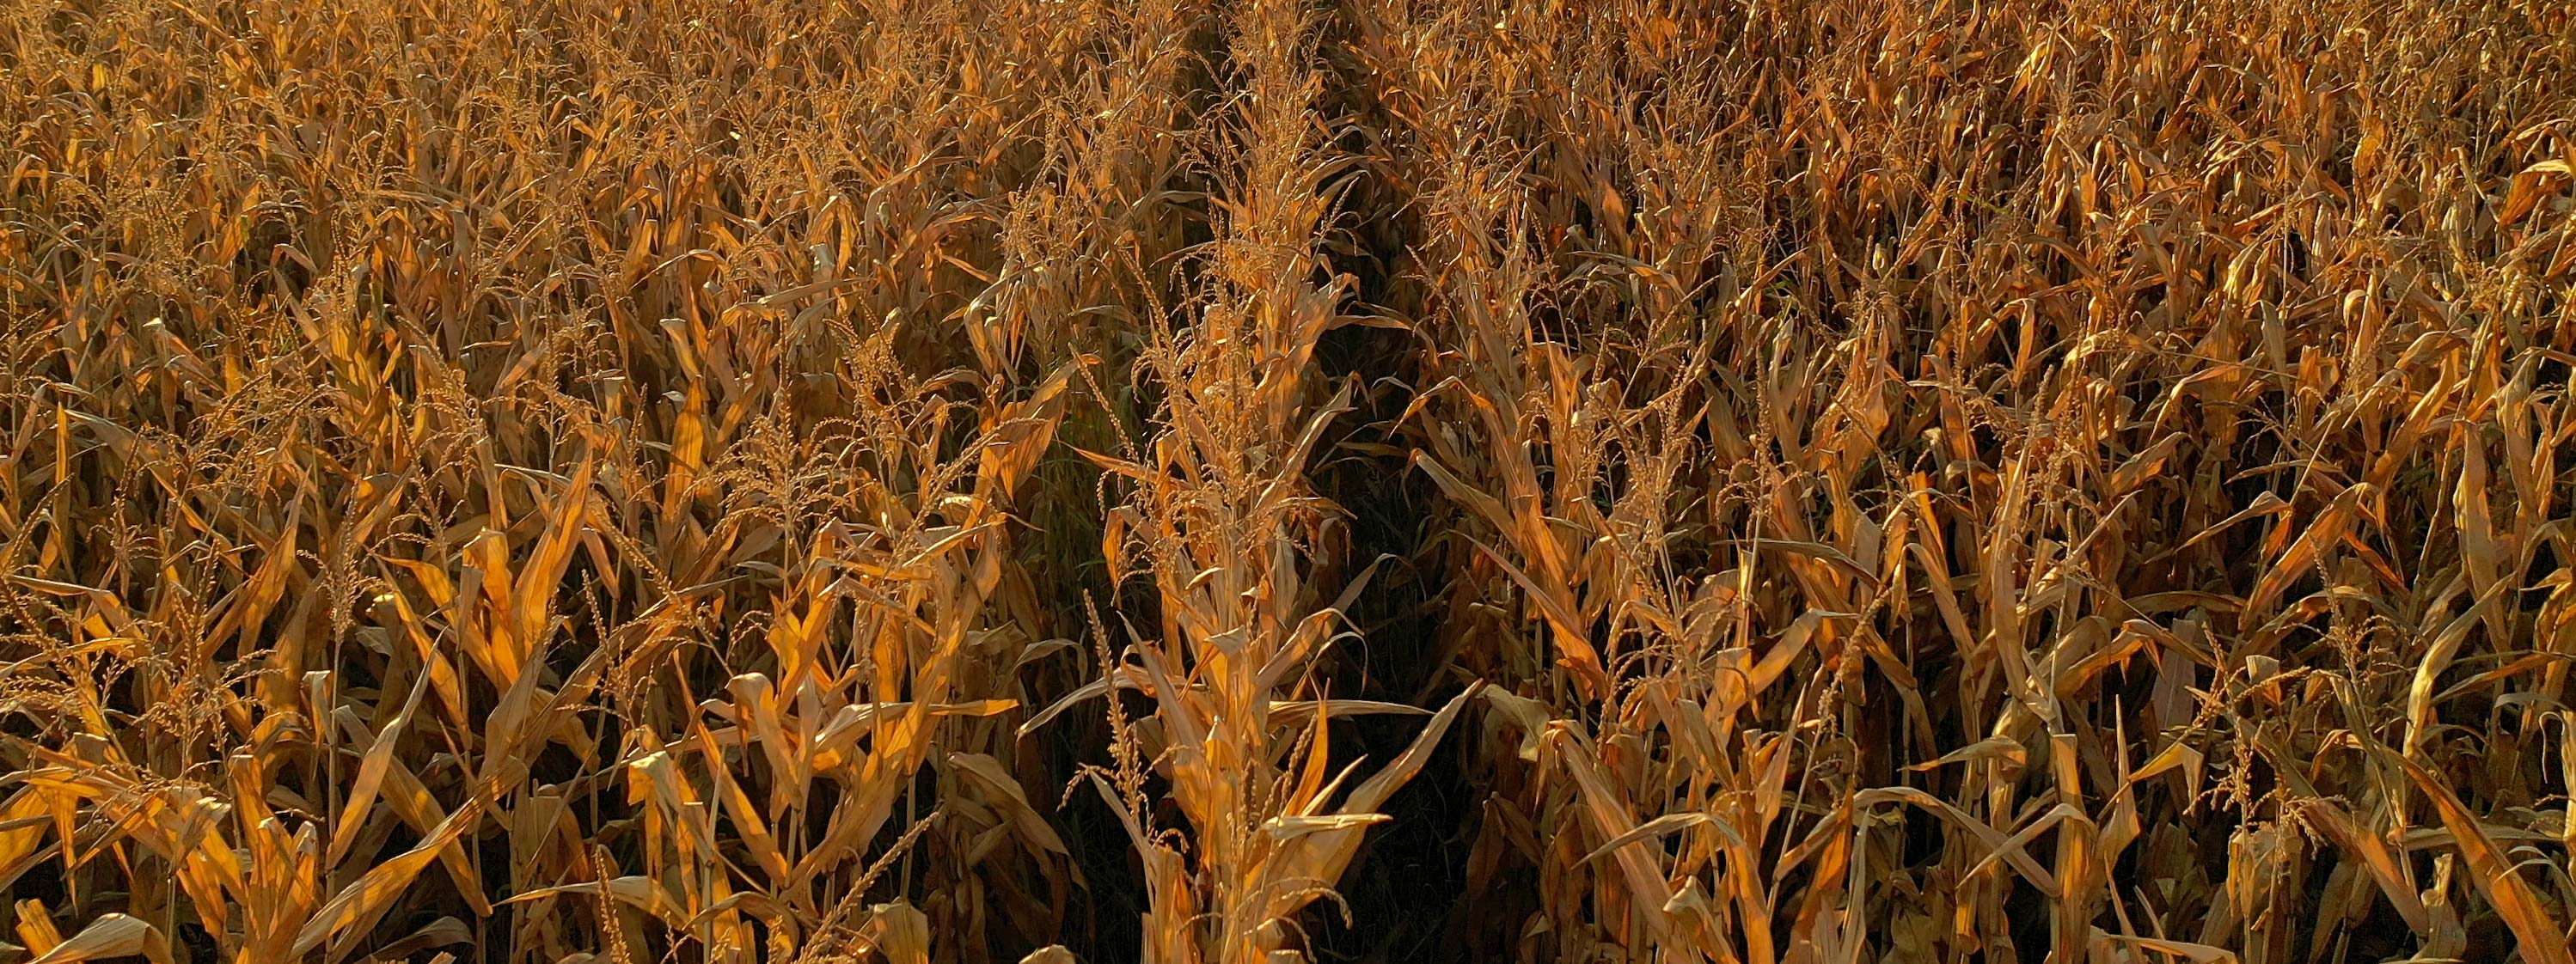 A field of crops damaged by drought